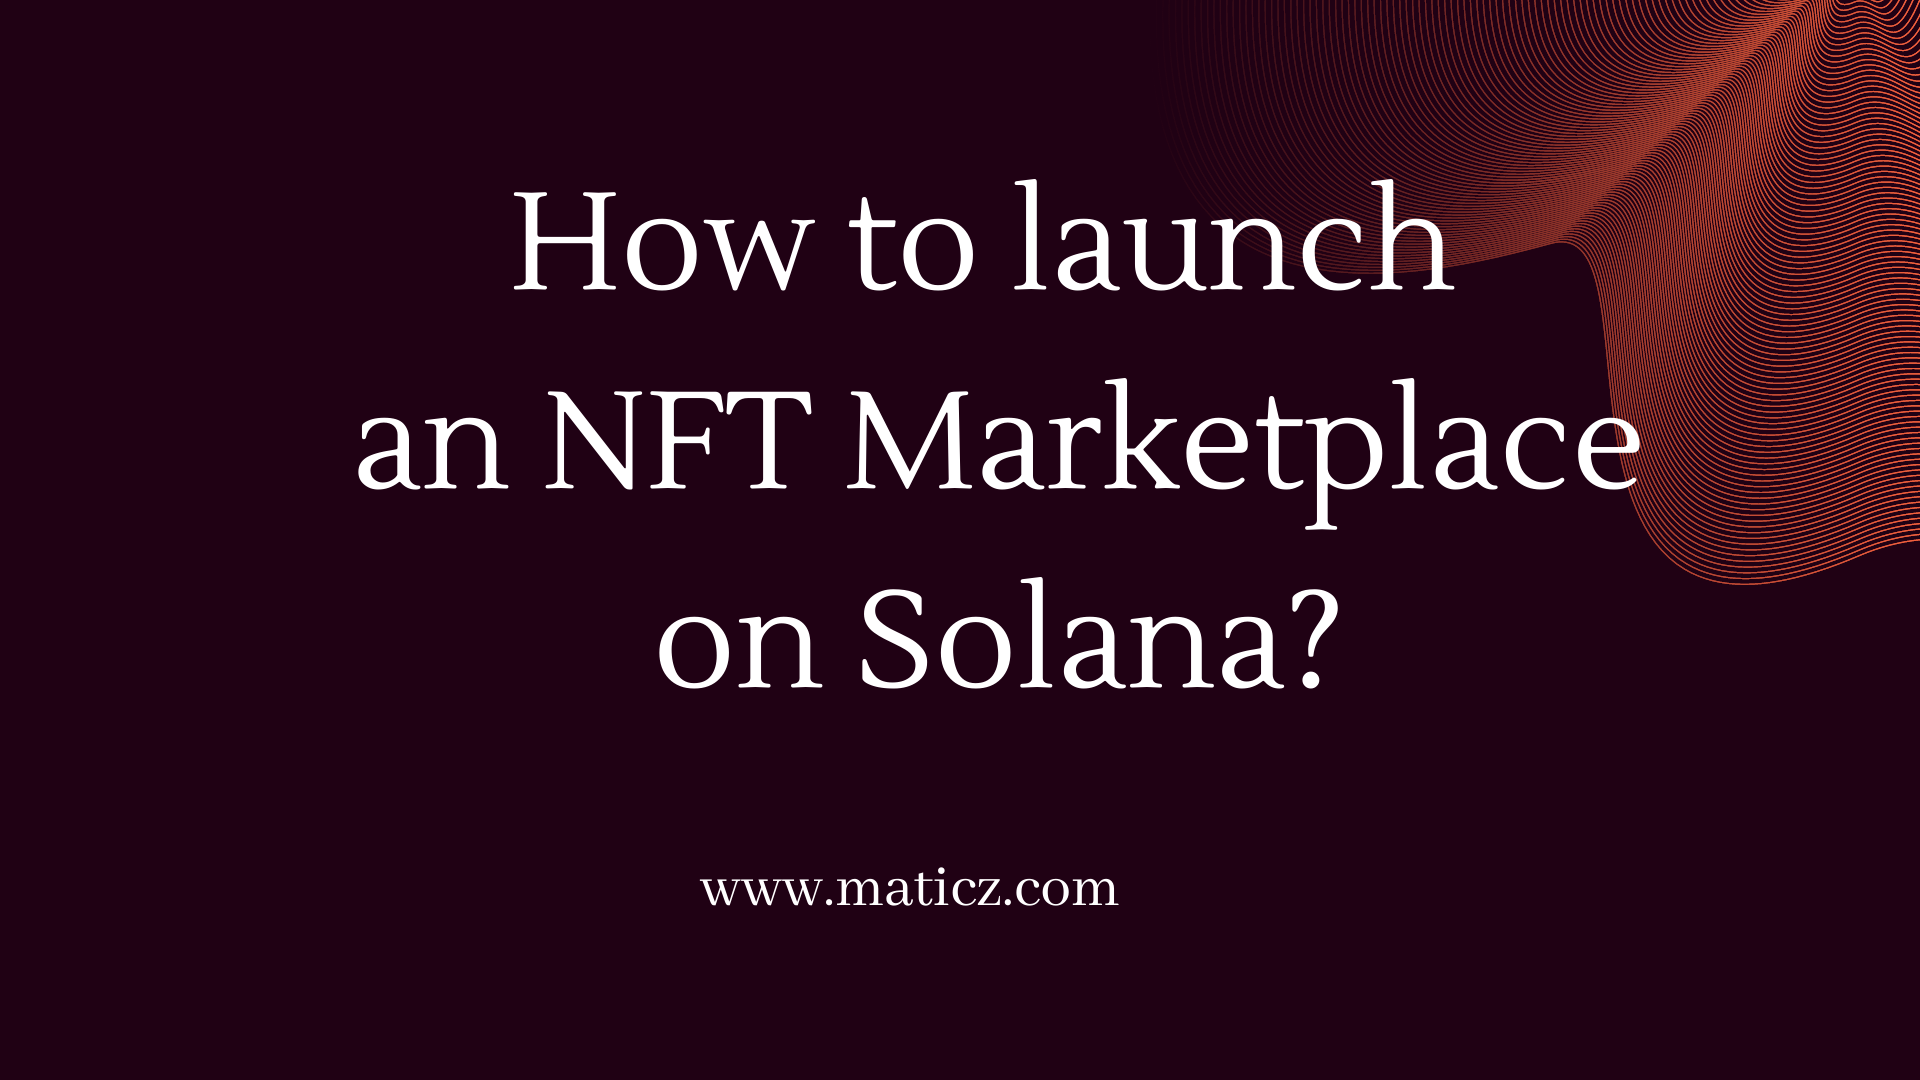 Article about How to Launch an NFT Marketplace on Solana